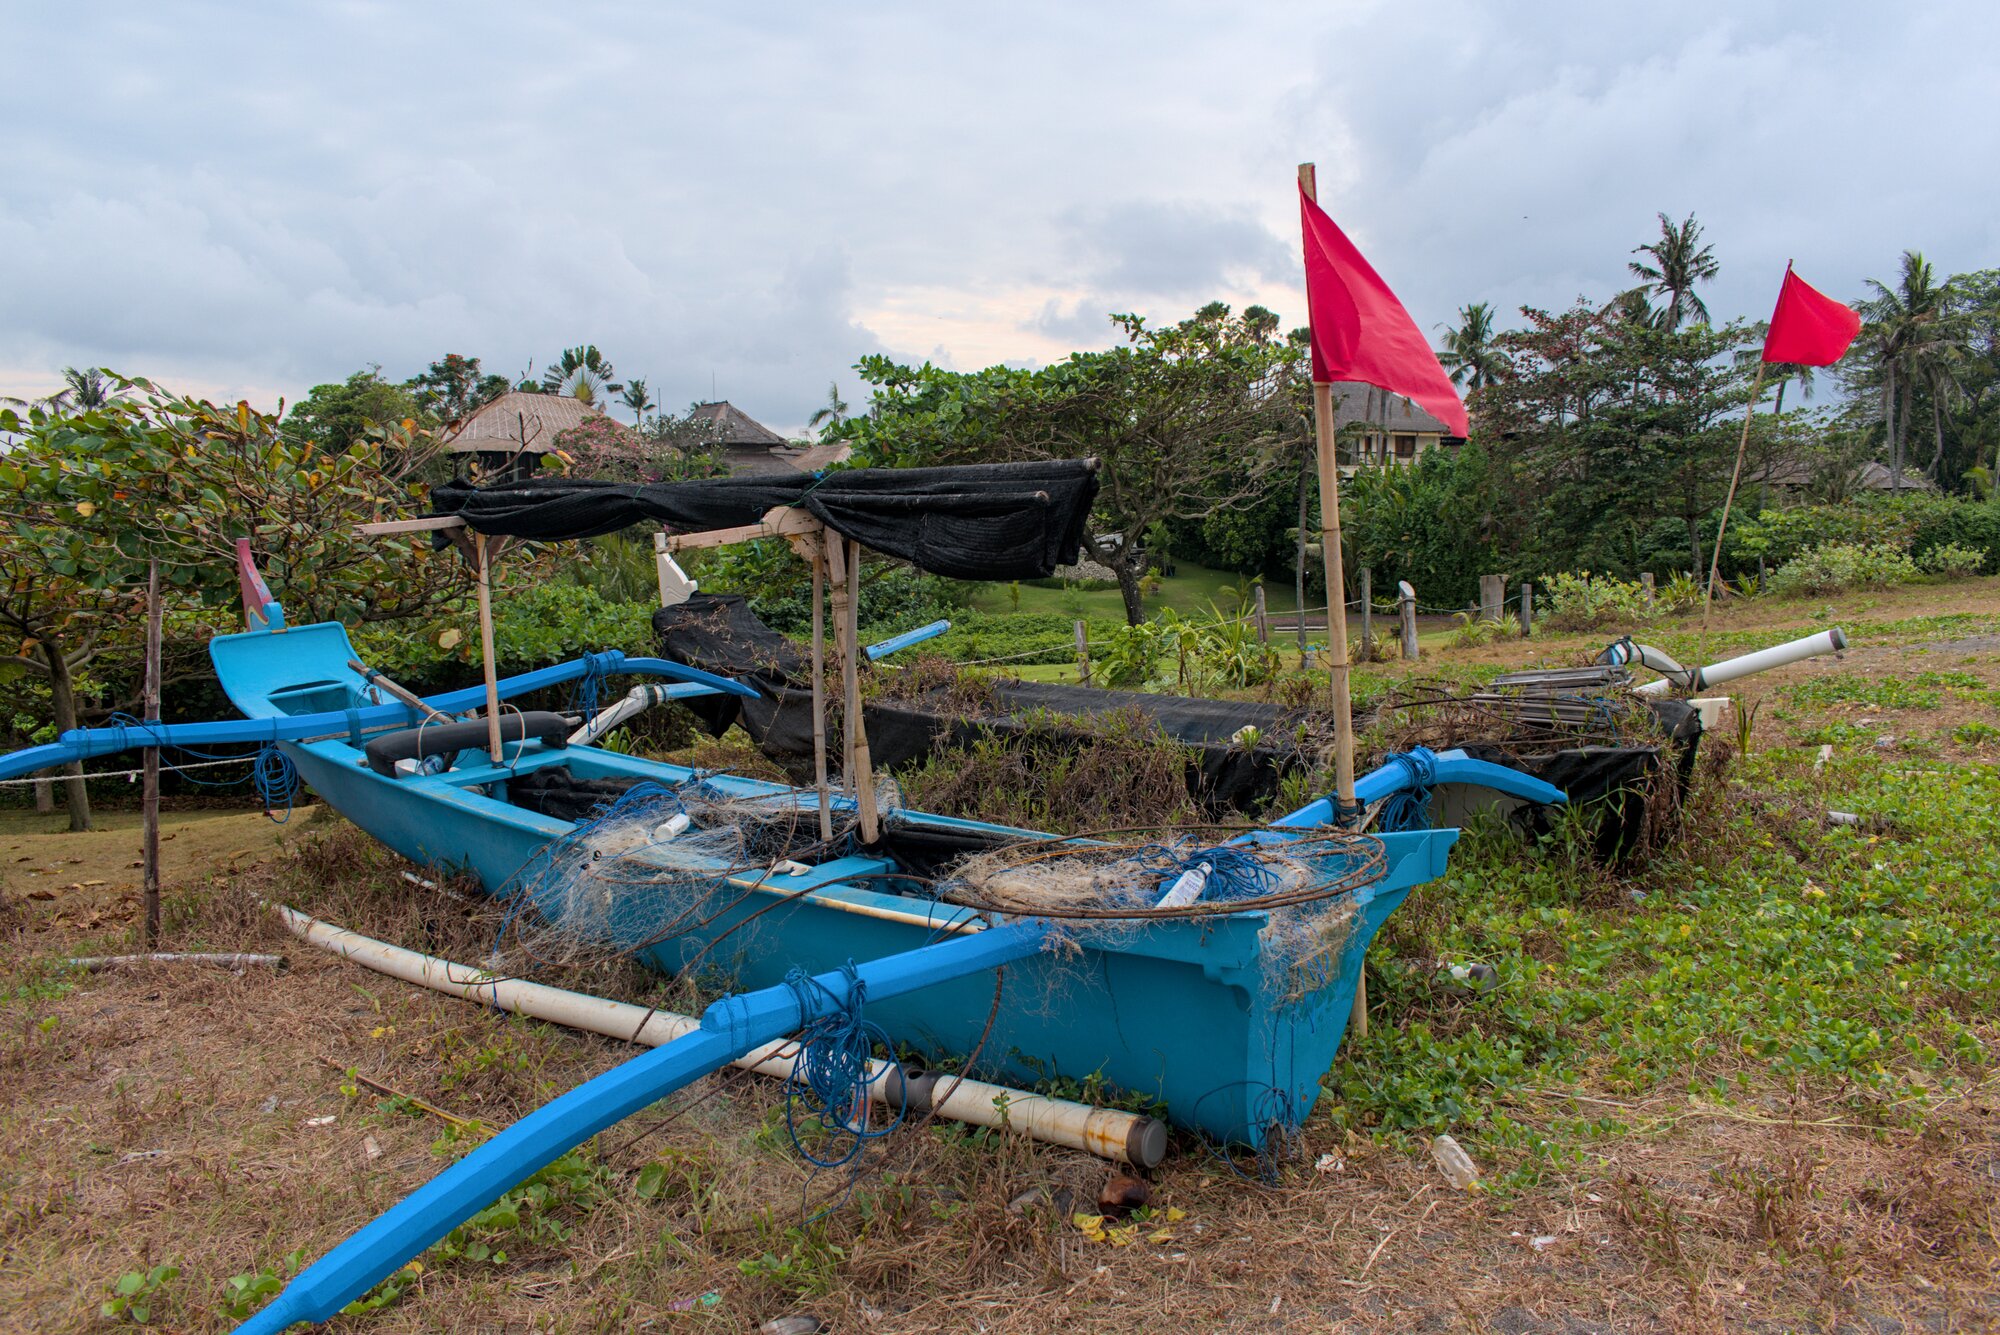 An almost fake-looking blue boat sitting high on the grass near the beach.